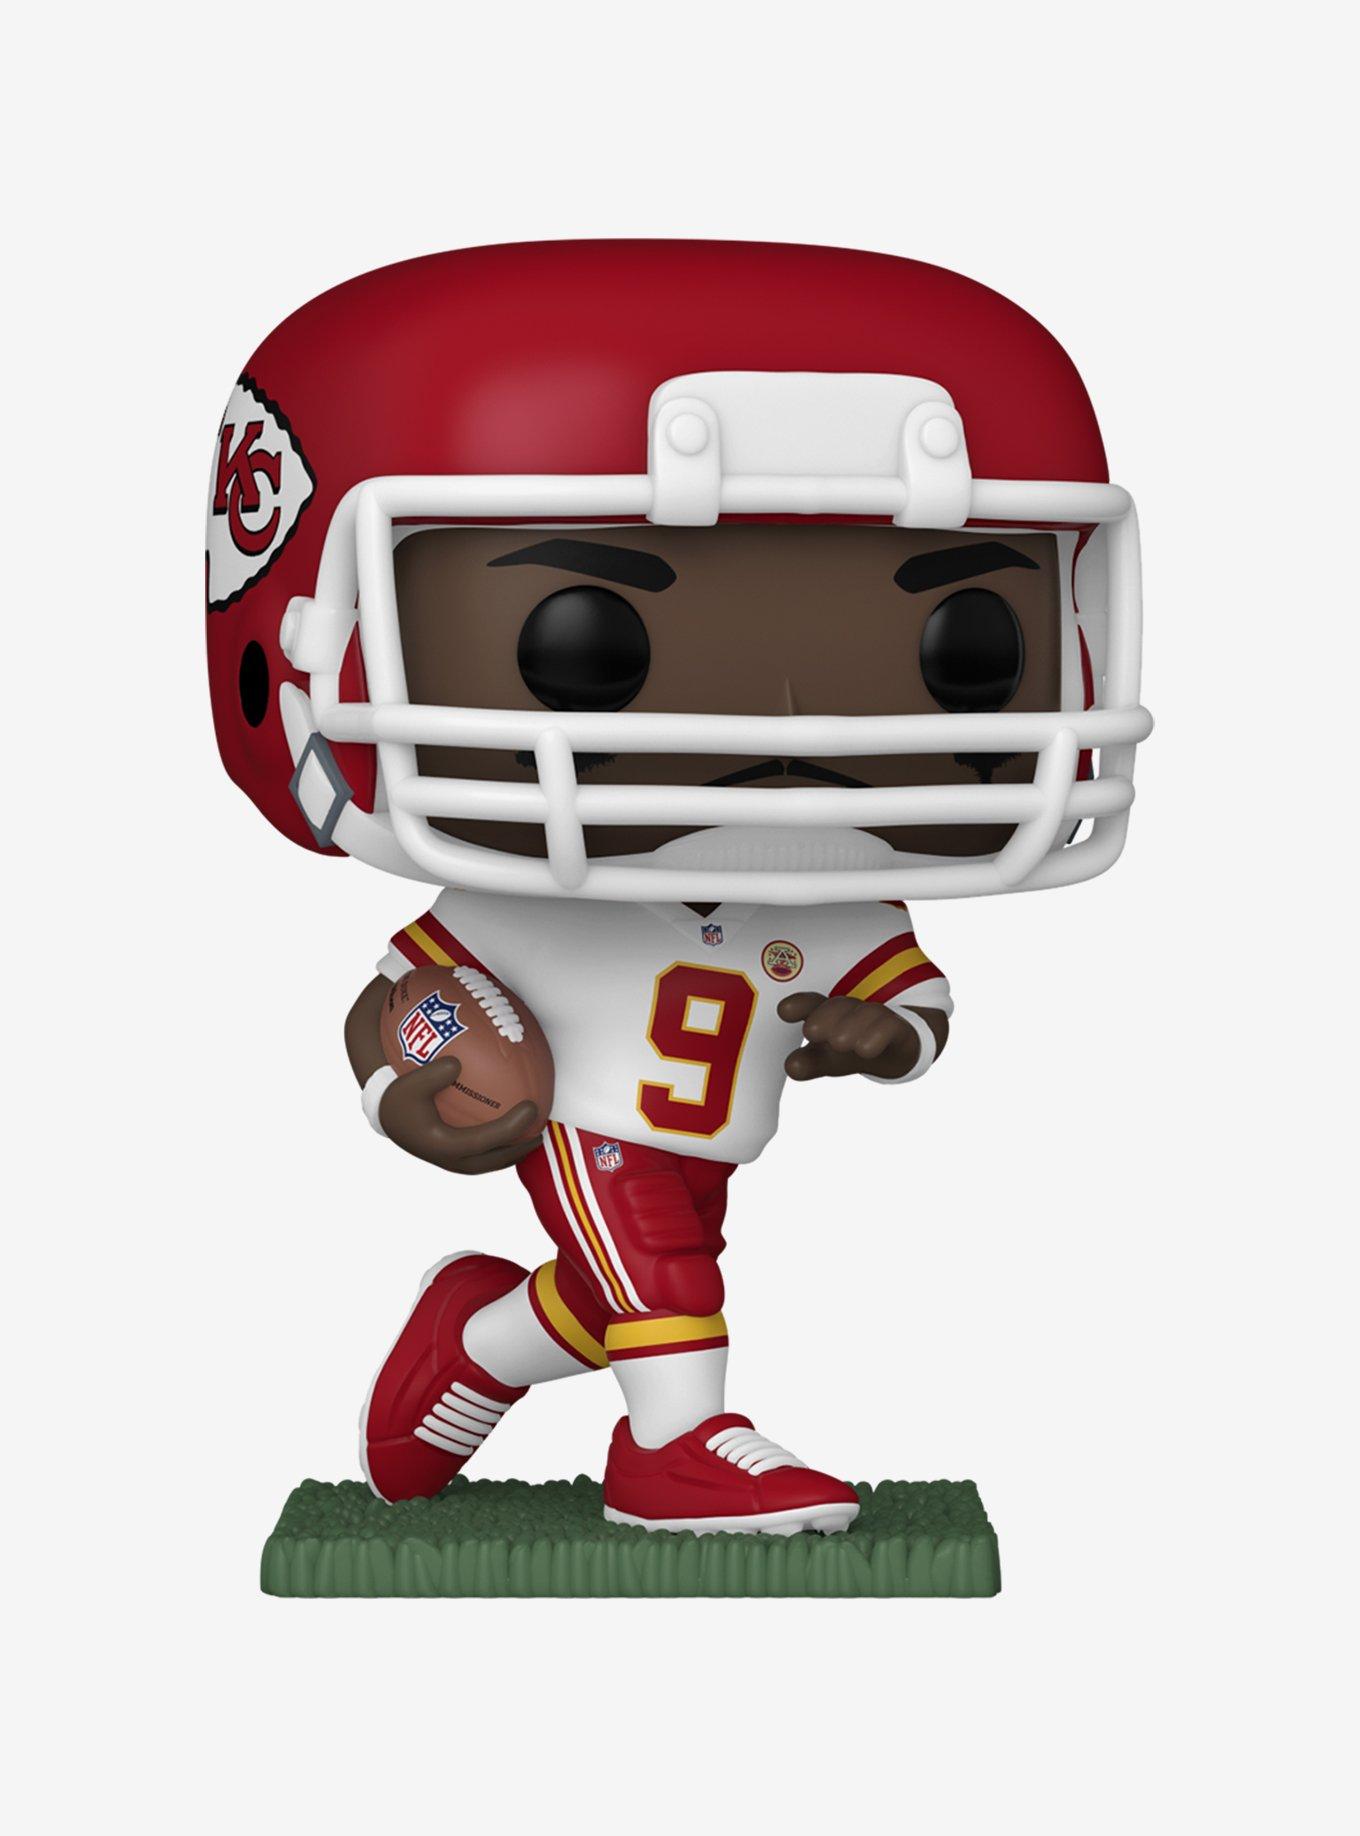 Funko - Congratulations to the Kansas City Chiefs for winning it all. Tell  us what NFL players we should make next! #Funko #FunkoPop #Pop #NFL #NFL100  #ChiefsKingdom